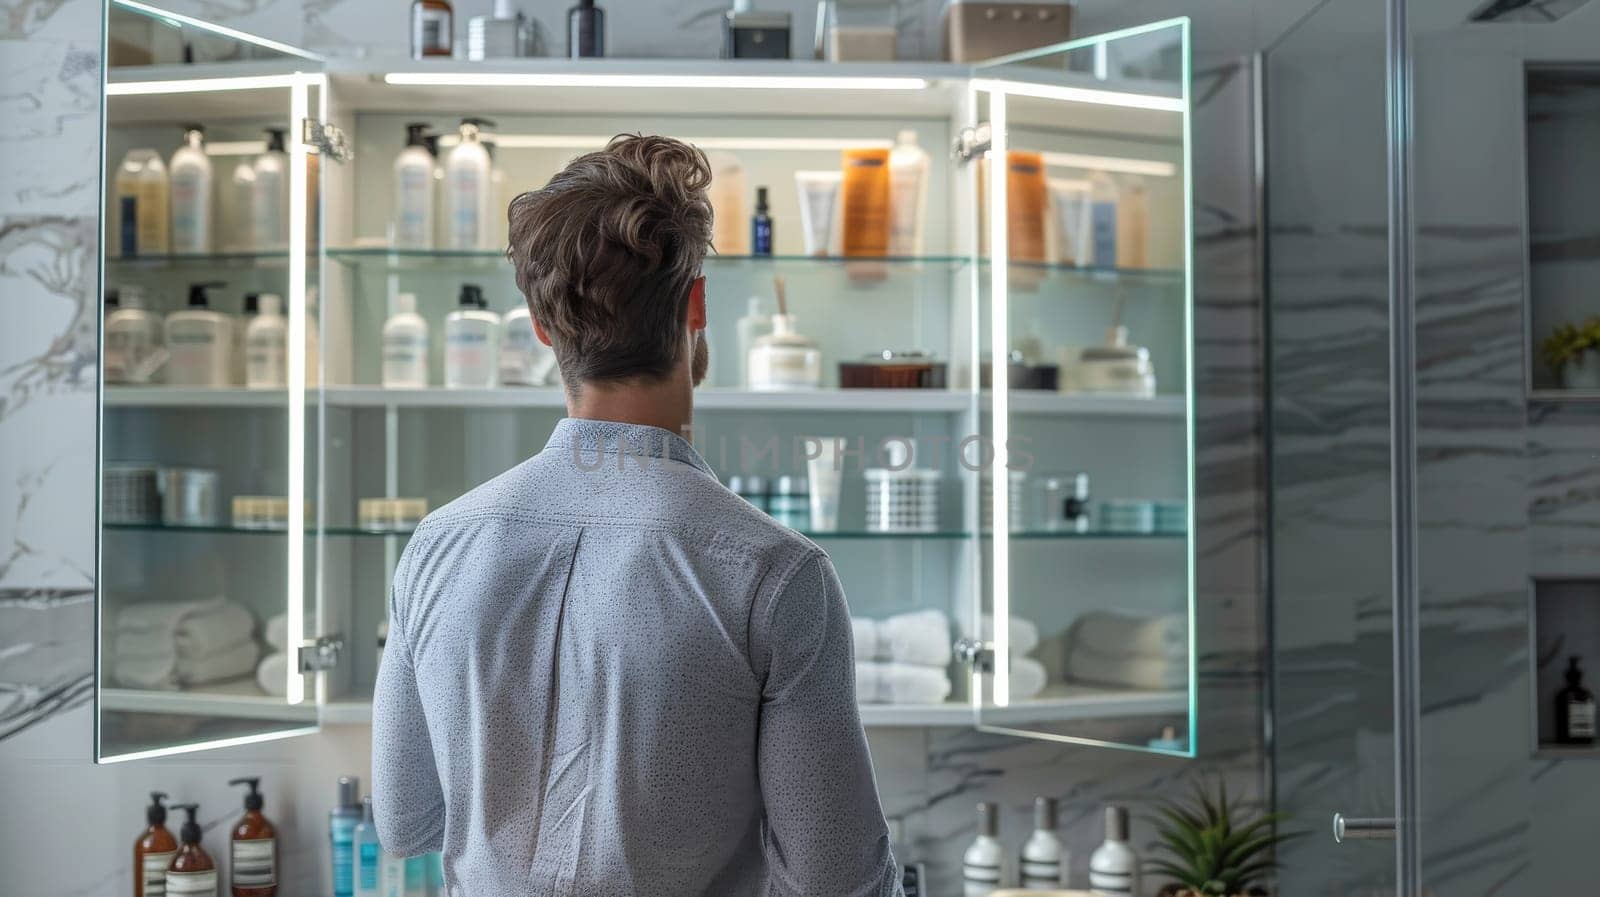 A man is standing in front of a bathroom cabinet with many bottles and bottles of lotion. The man is looking at the bottles and seems to be contemplating which one to use